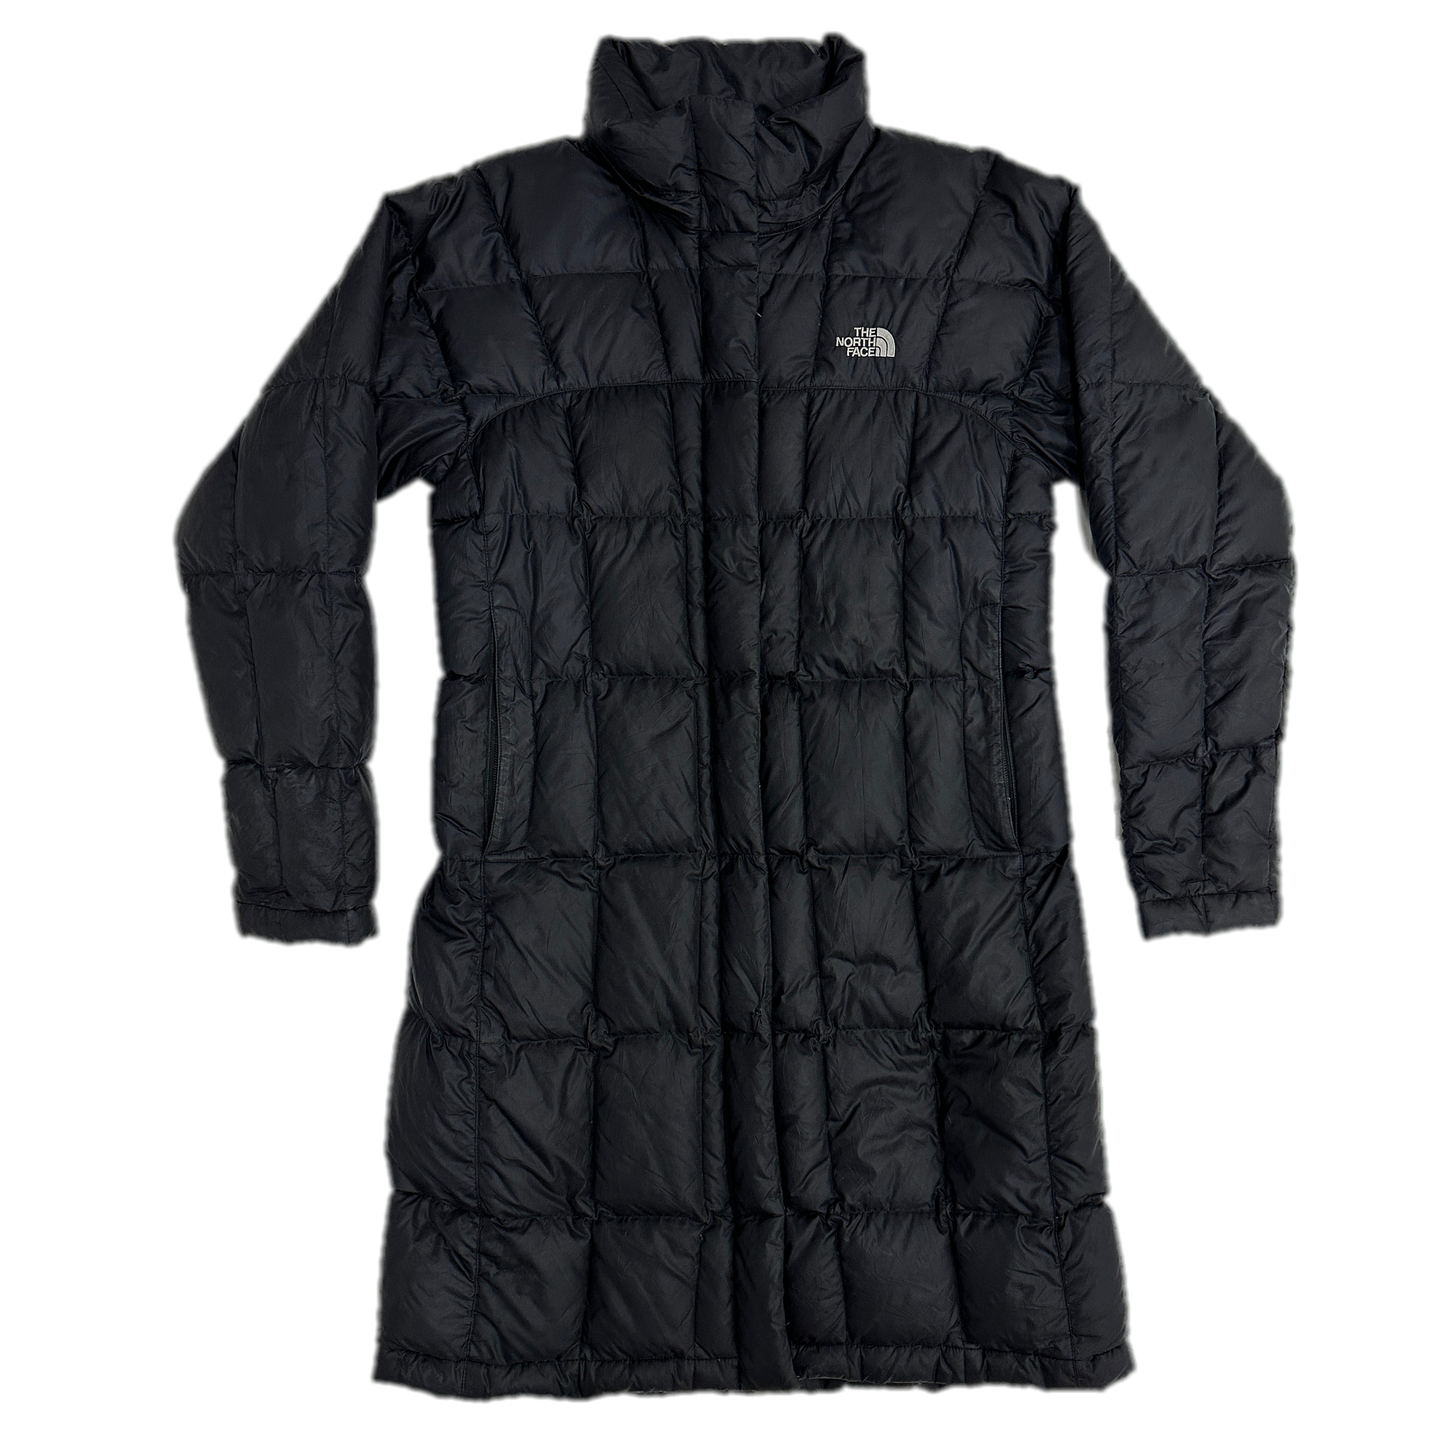 The North Face Quilted Zip & Button Up Puffer Coat sz S